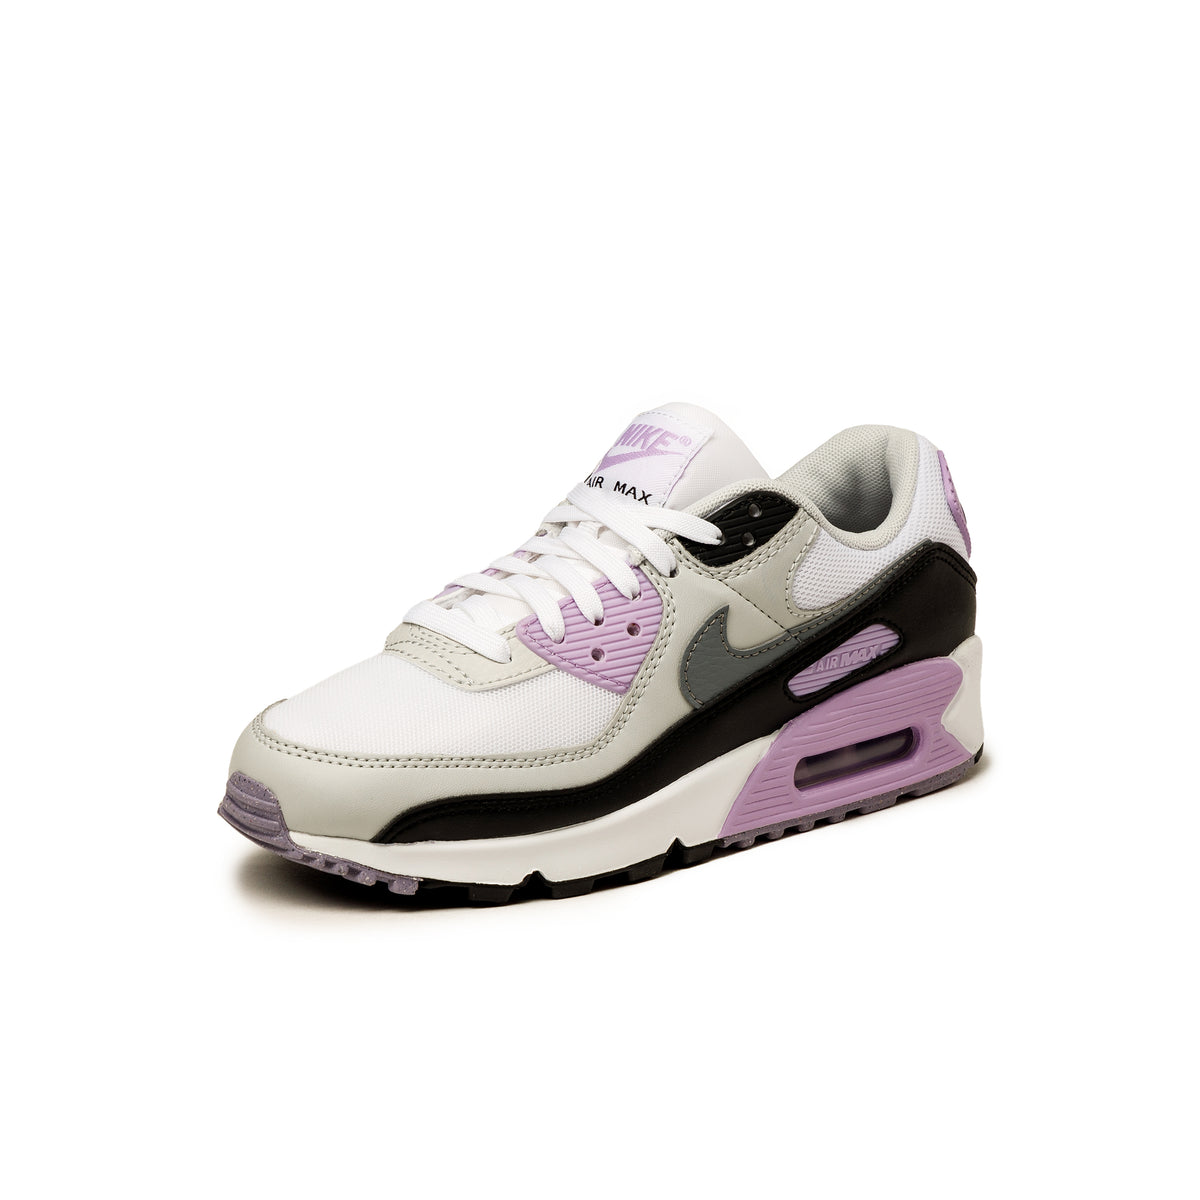 Nike Wmns Air Max 90 » Buy online now!